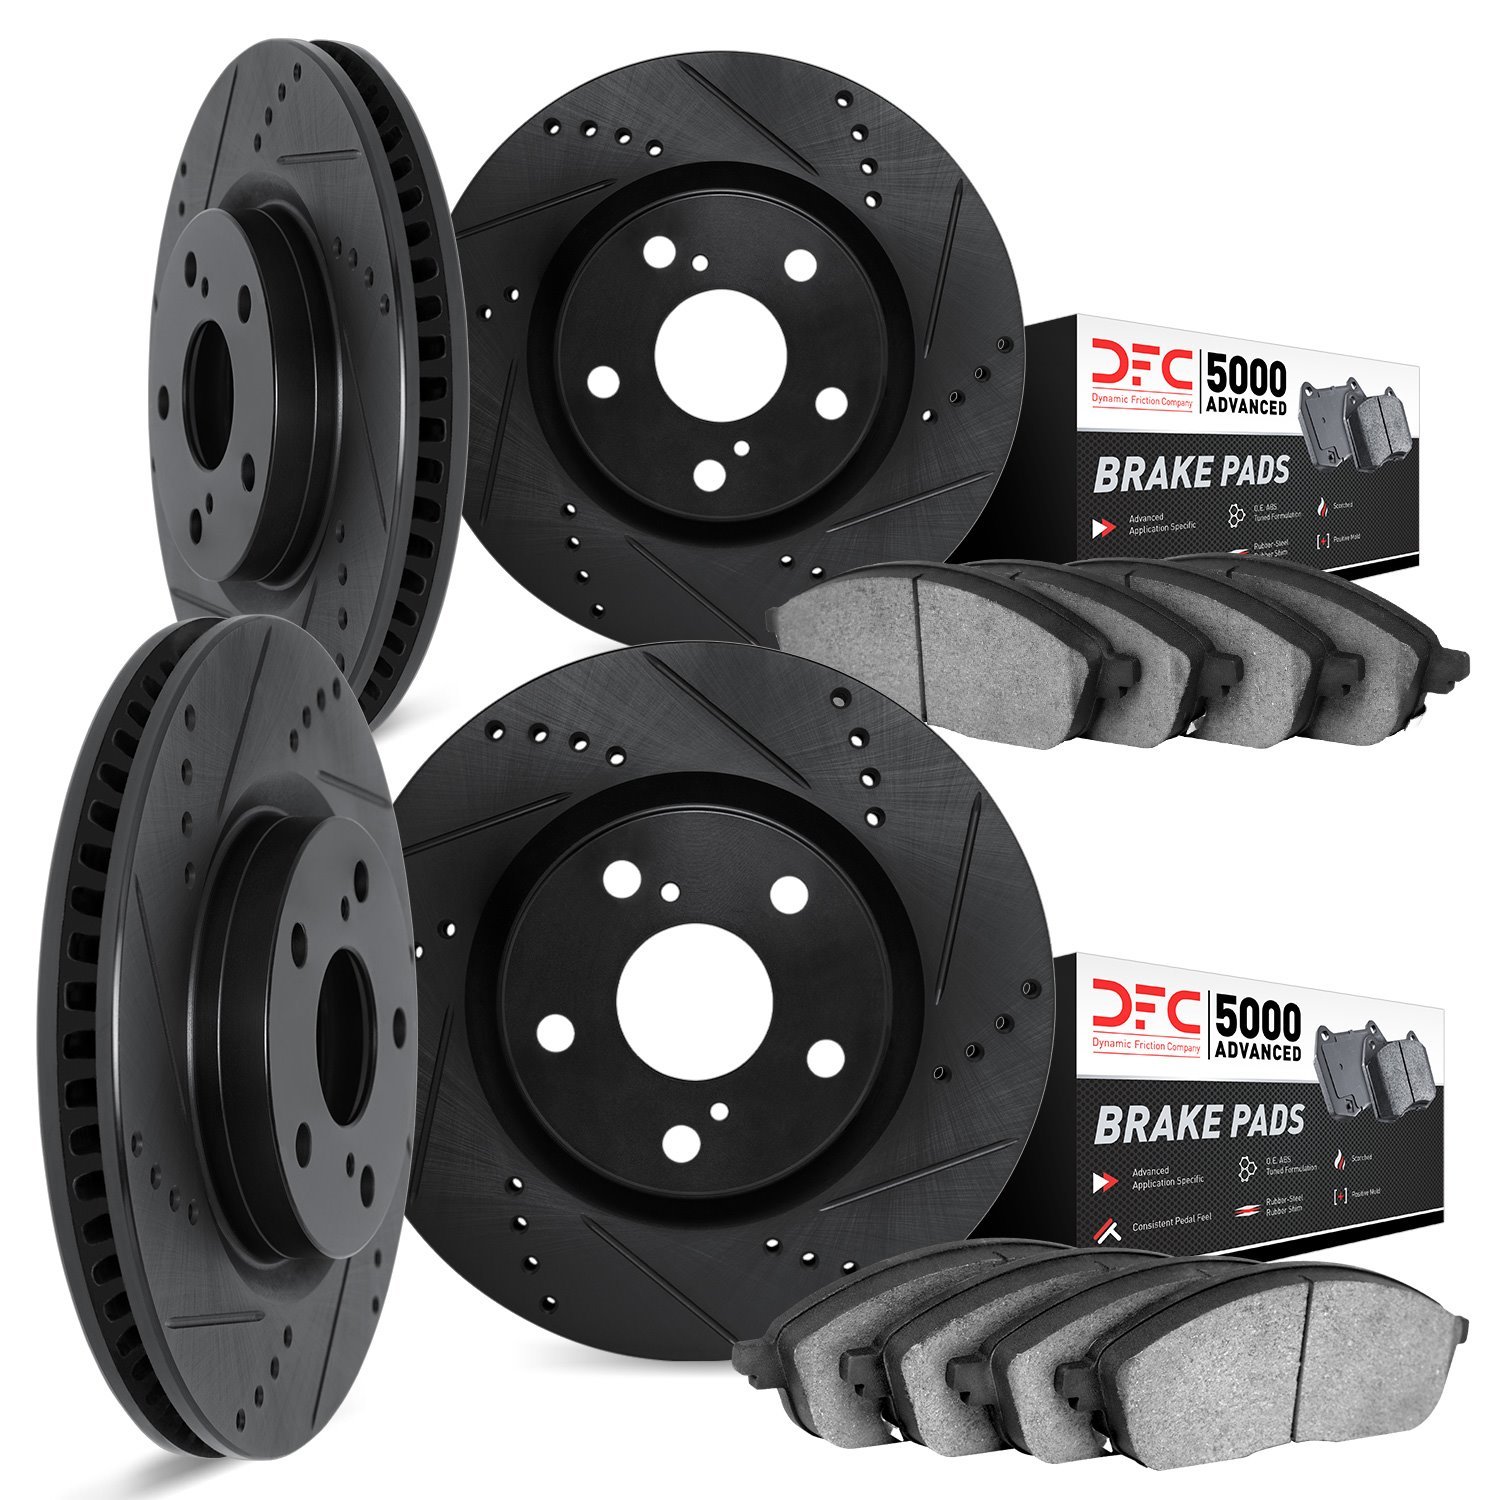 8504-02003 Drilled/Slotted Brake Rotors w/5000 Advanced Brake Pads Kit [Black], 1977-1988 Porsche, Position: Front and Rear